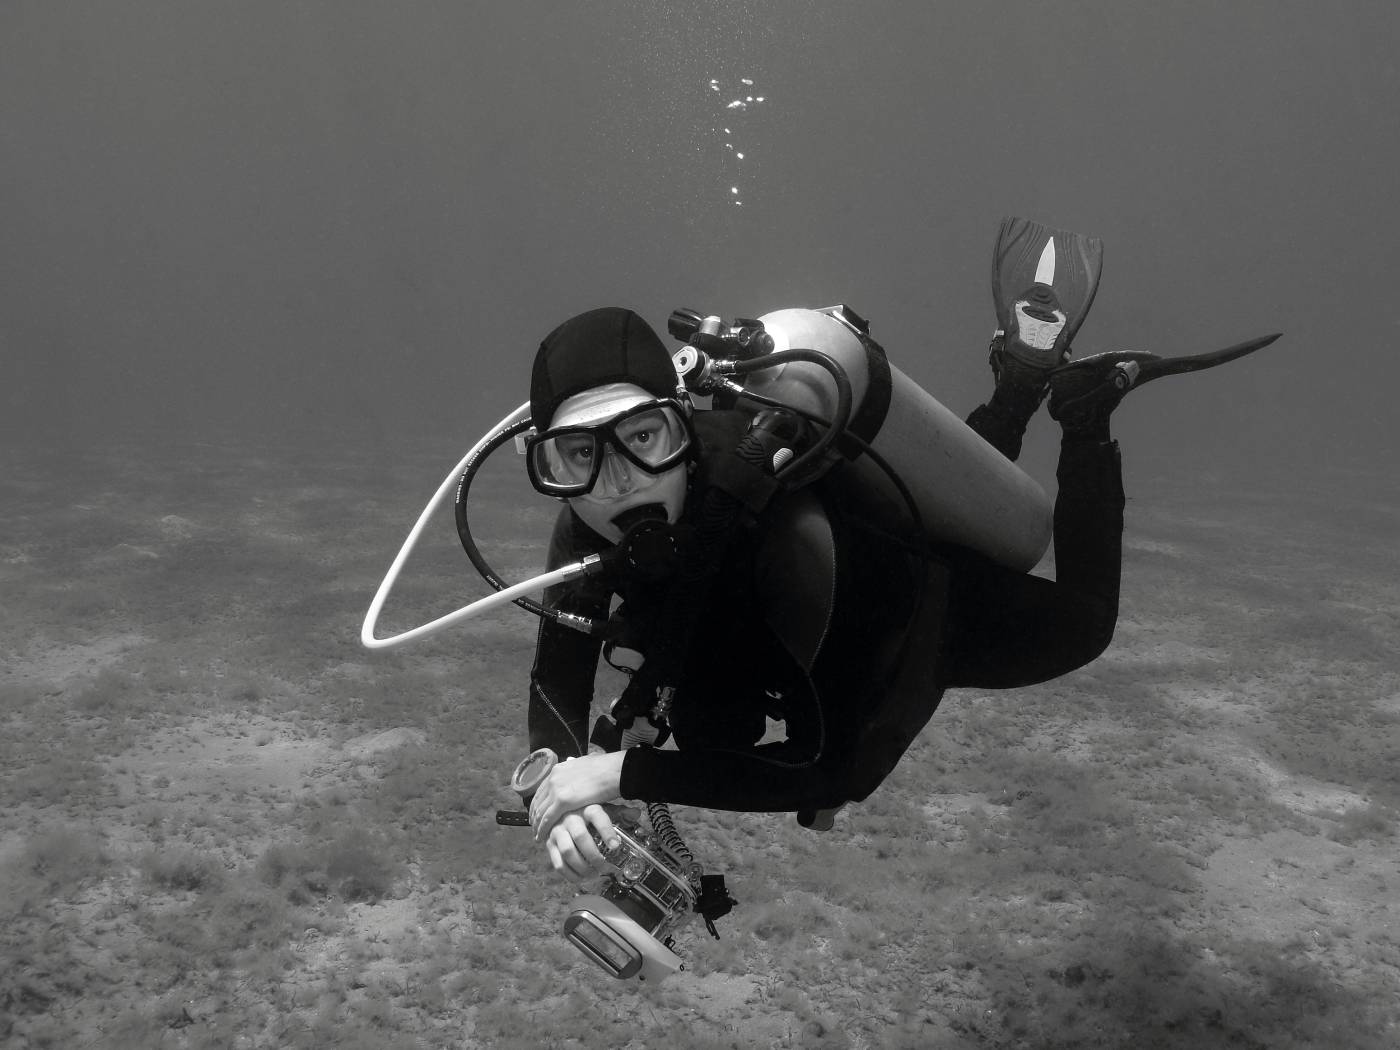 Kate with a camera. Scuba diving in the Abu Dabbab bay.